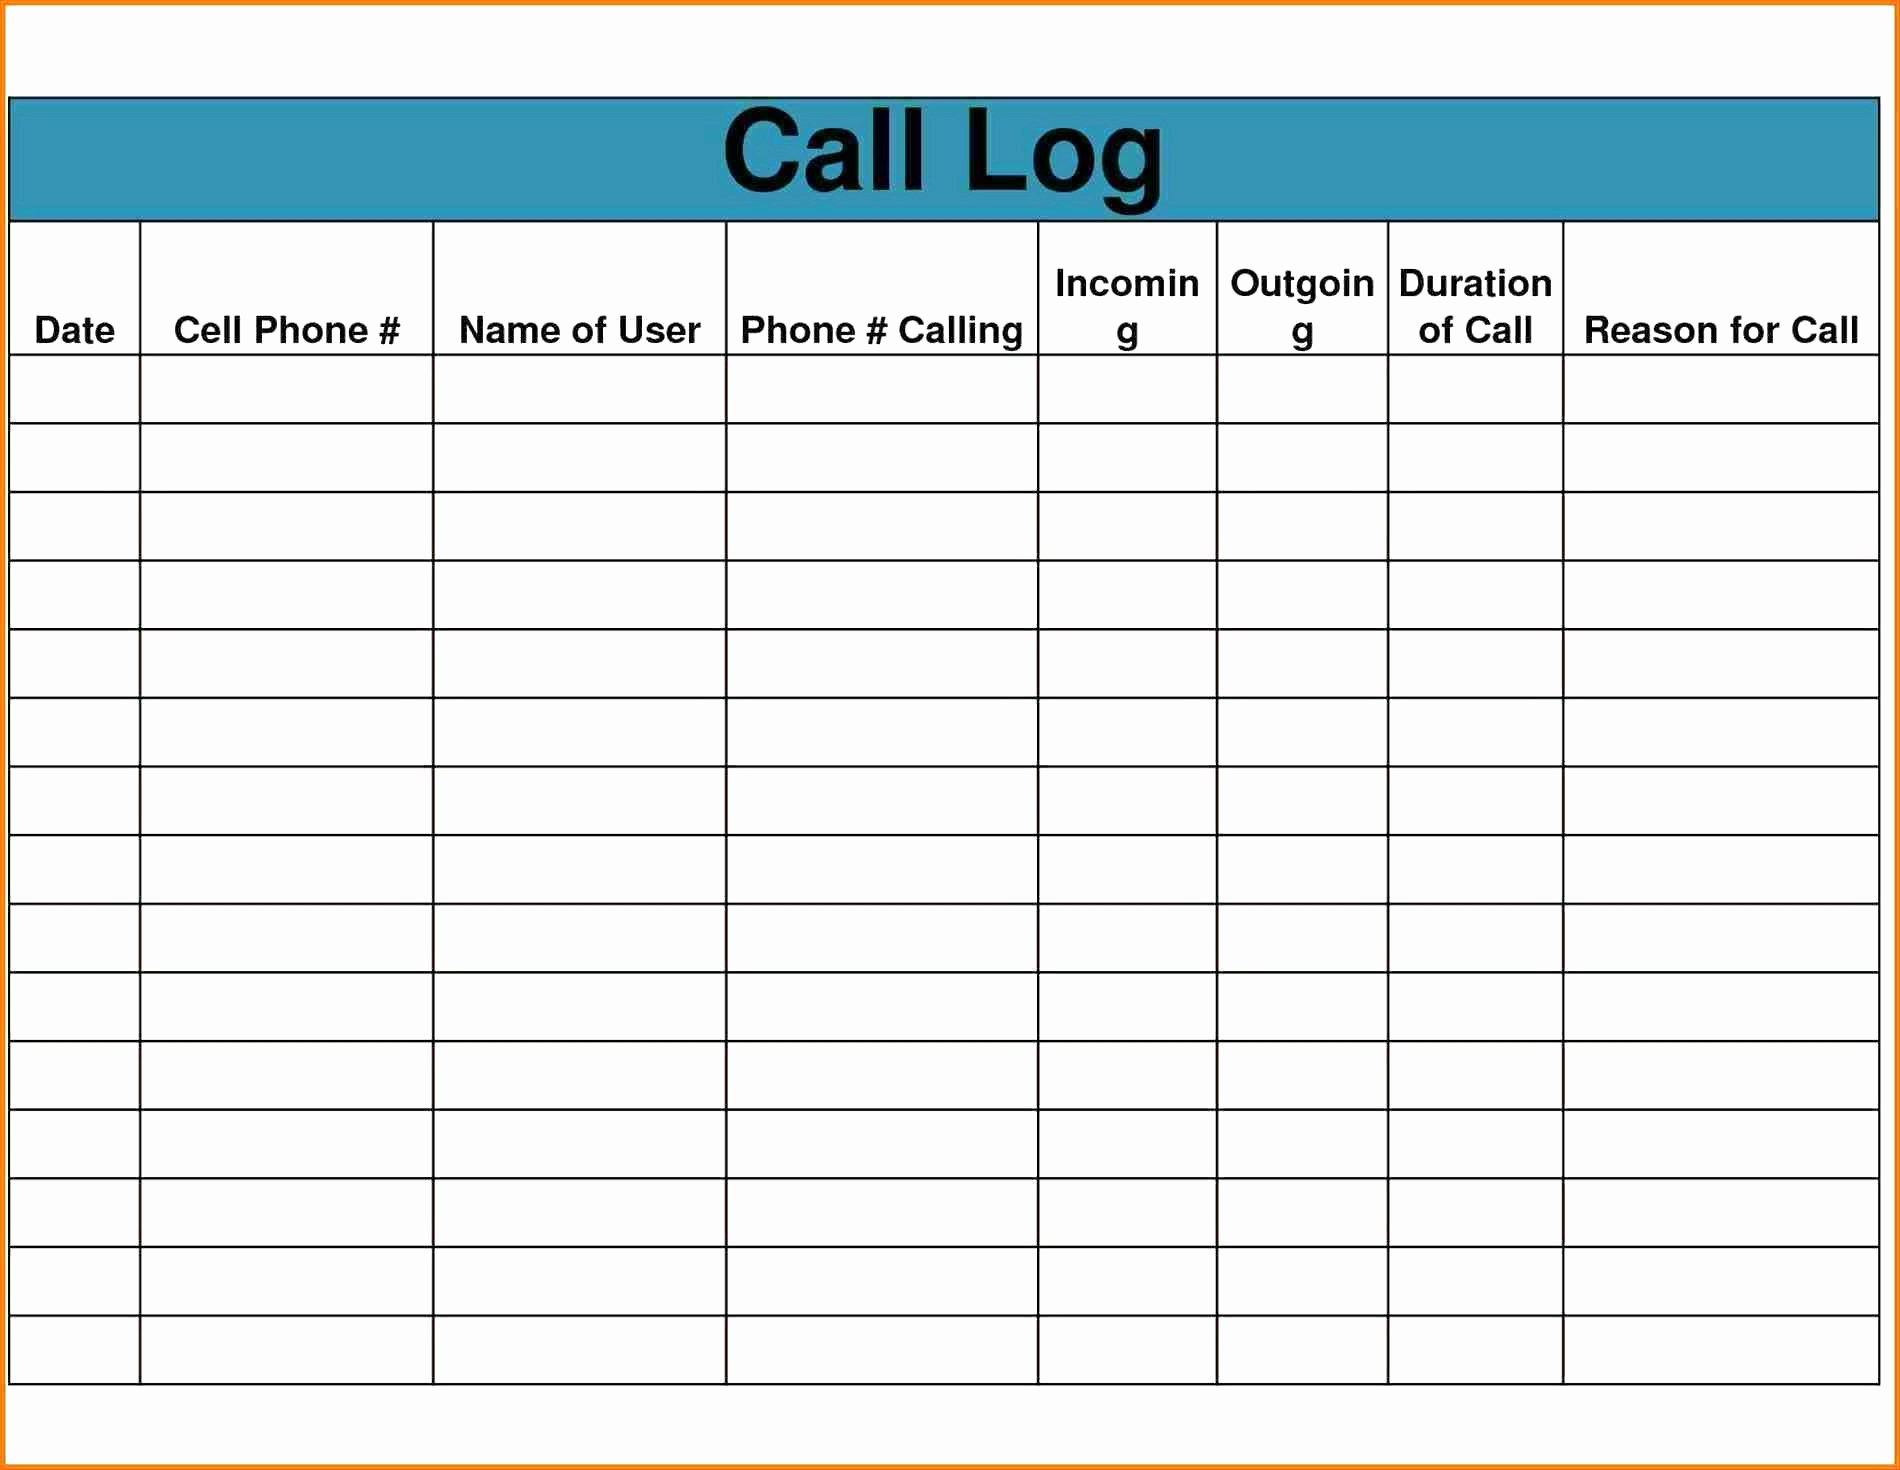 Cold Calling Excel Spreadsheet Spreadsheet Downloa cold calling excel